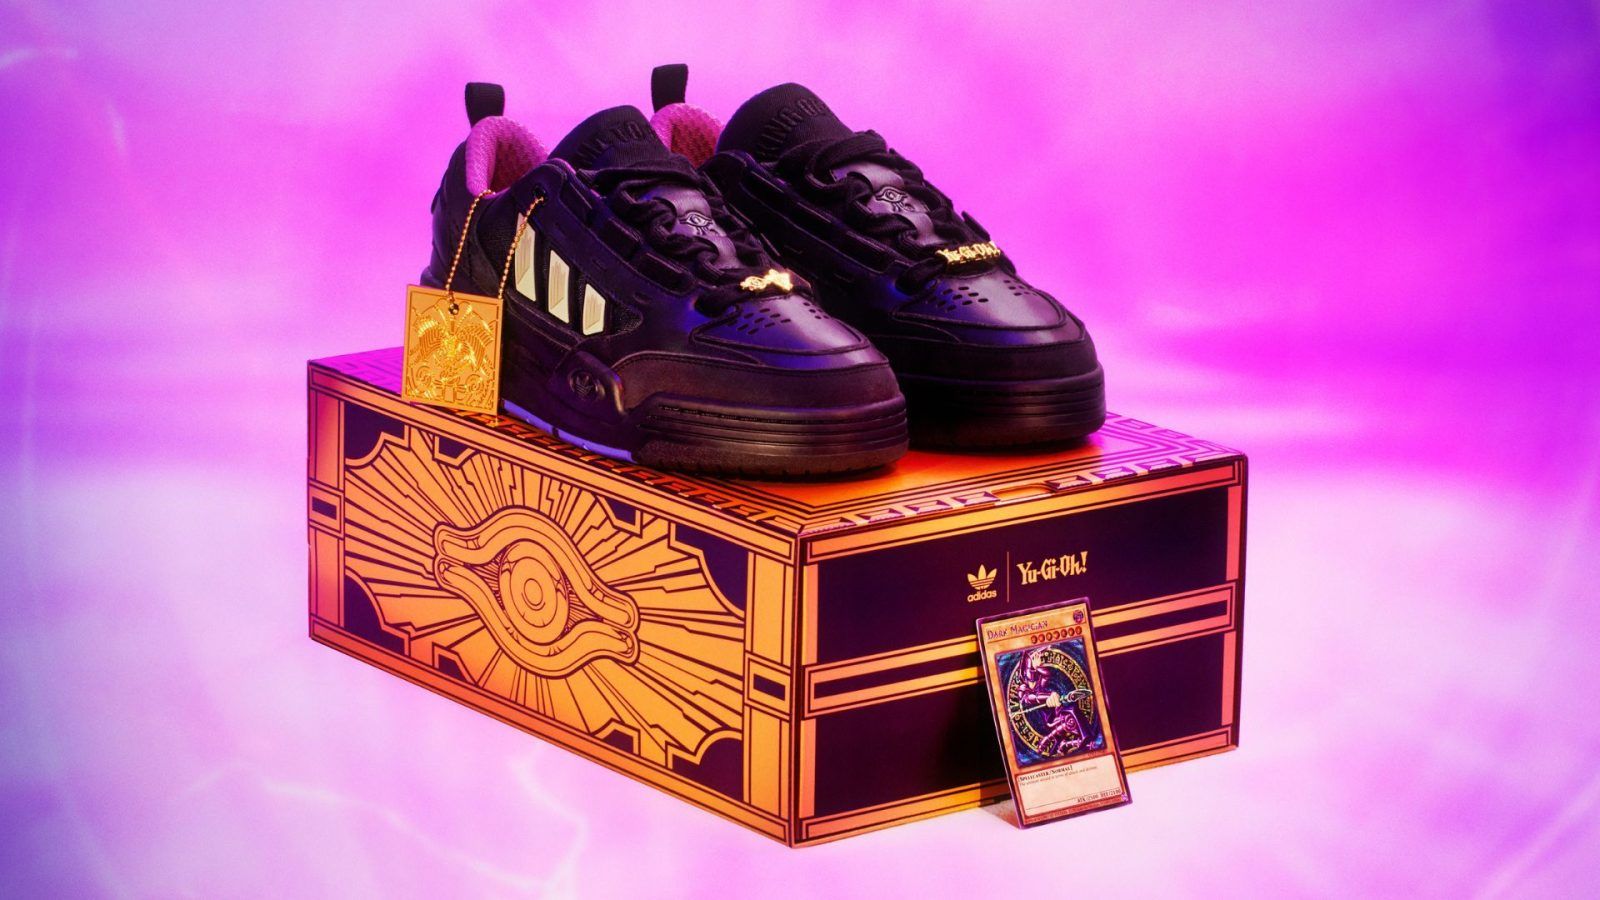 Send foes to the shadow realm with the 'Yu-Gi-Oh!' and Adidas collab